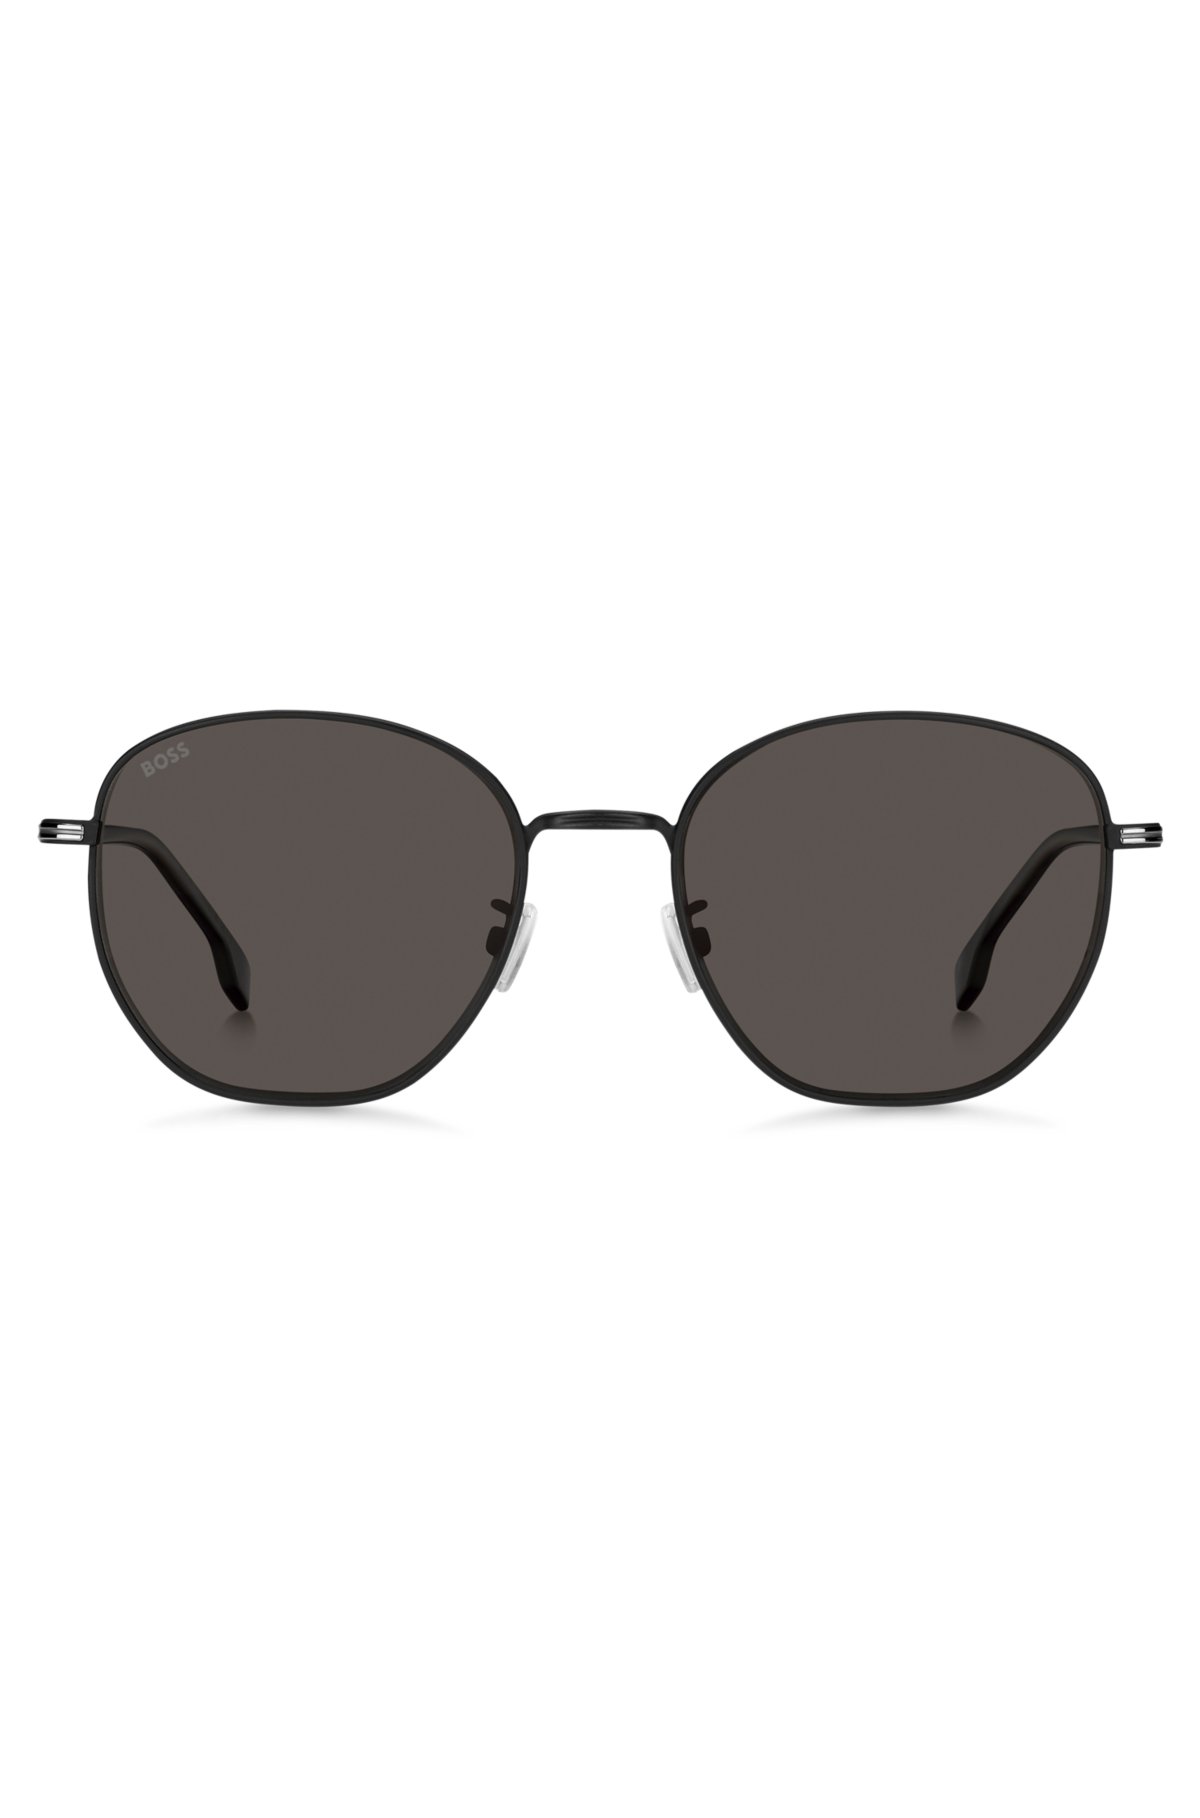 Round sunglasses in black metal with silver-tone hardware, Black